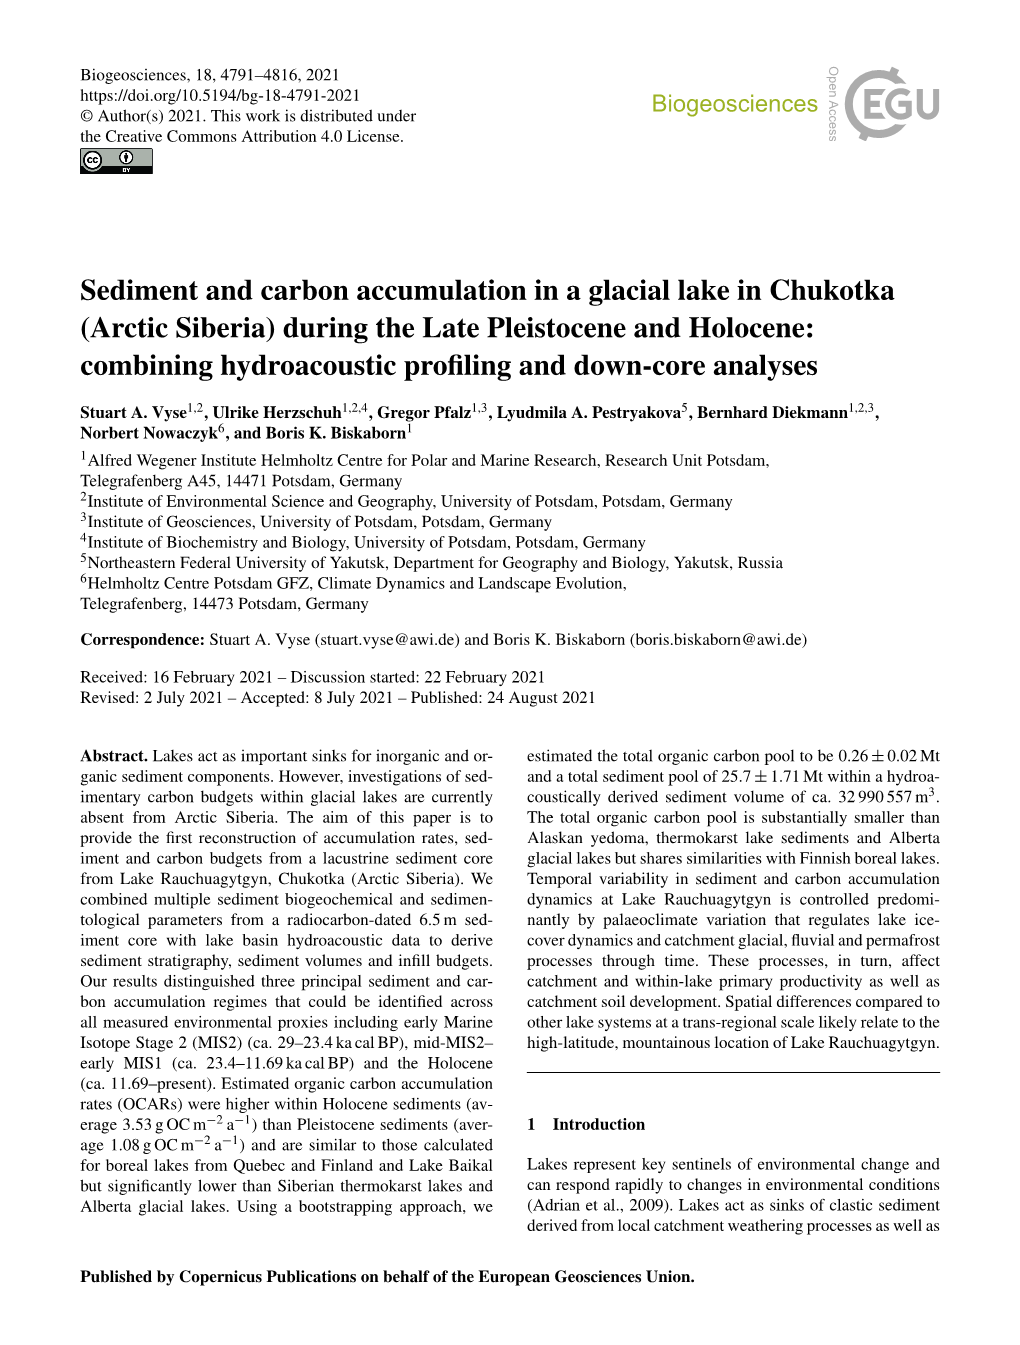 Sediment and Carbon Accumulation in a Glacial Lake in Chukotka